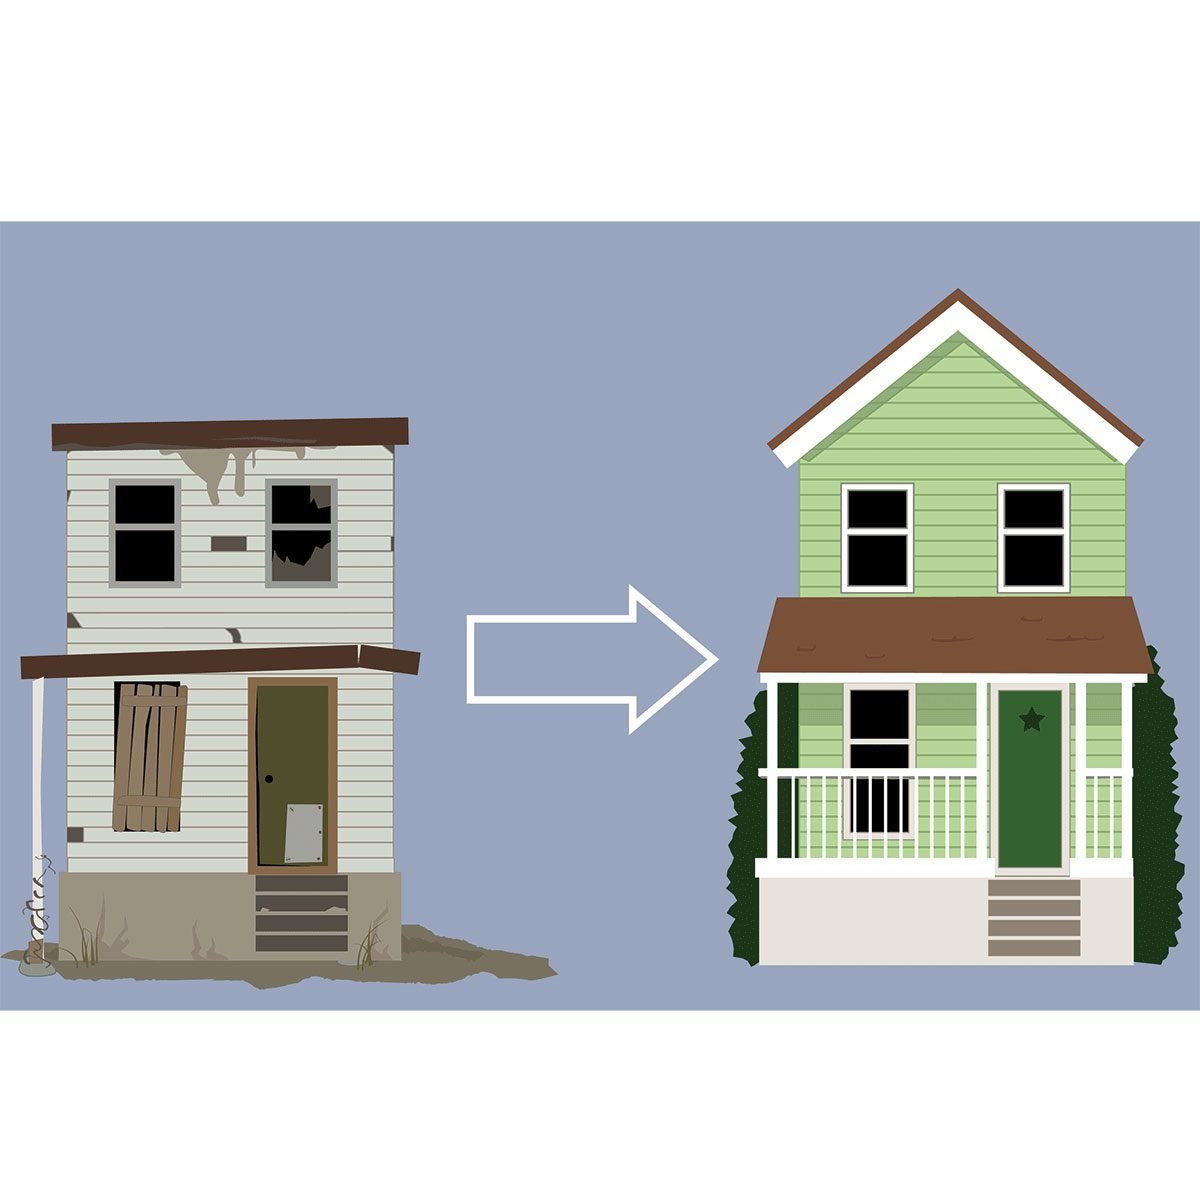 Common Problems With Flipped Houses